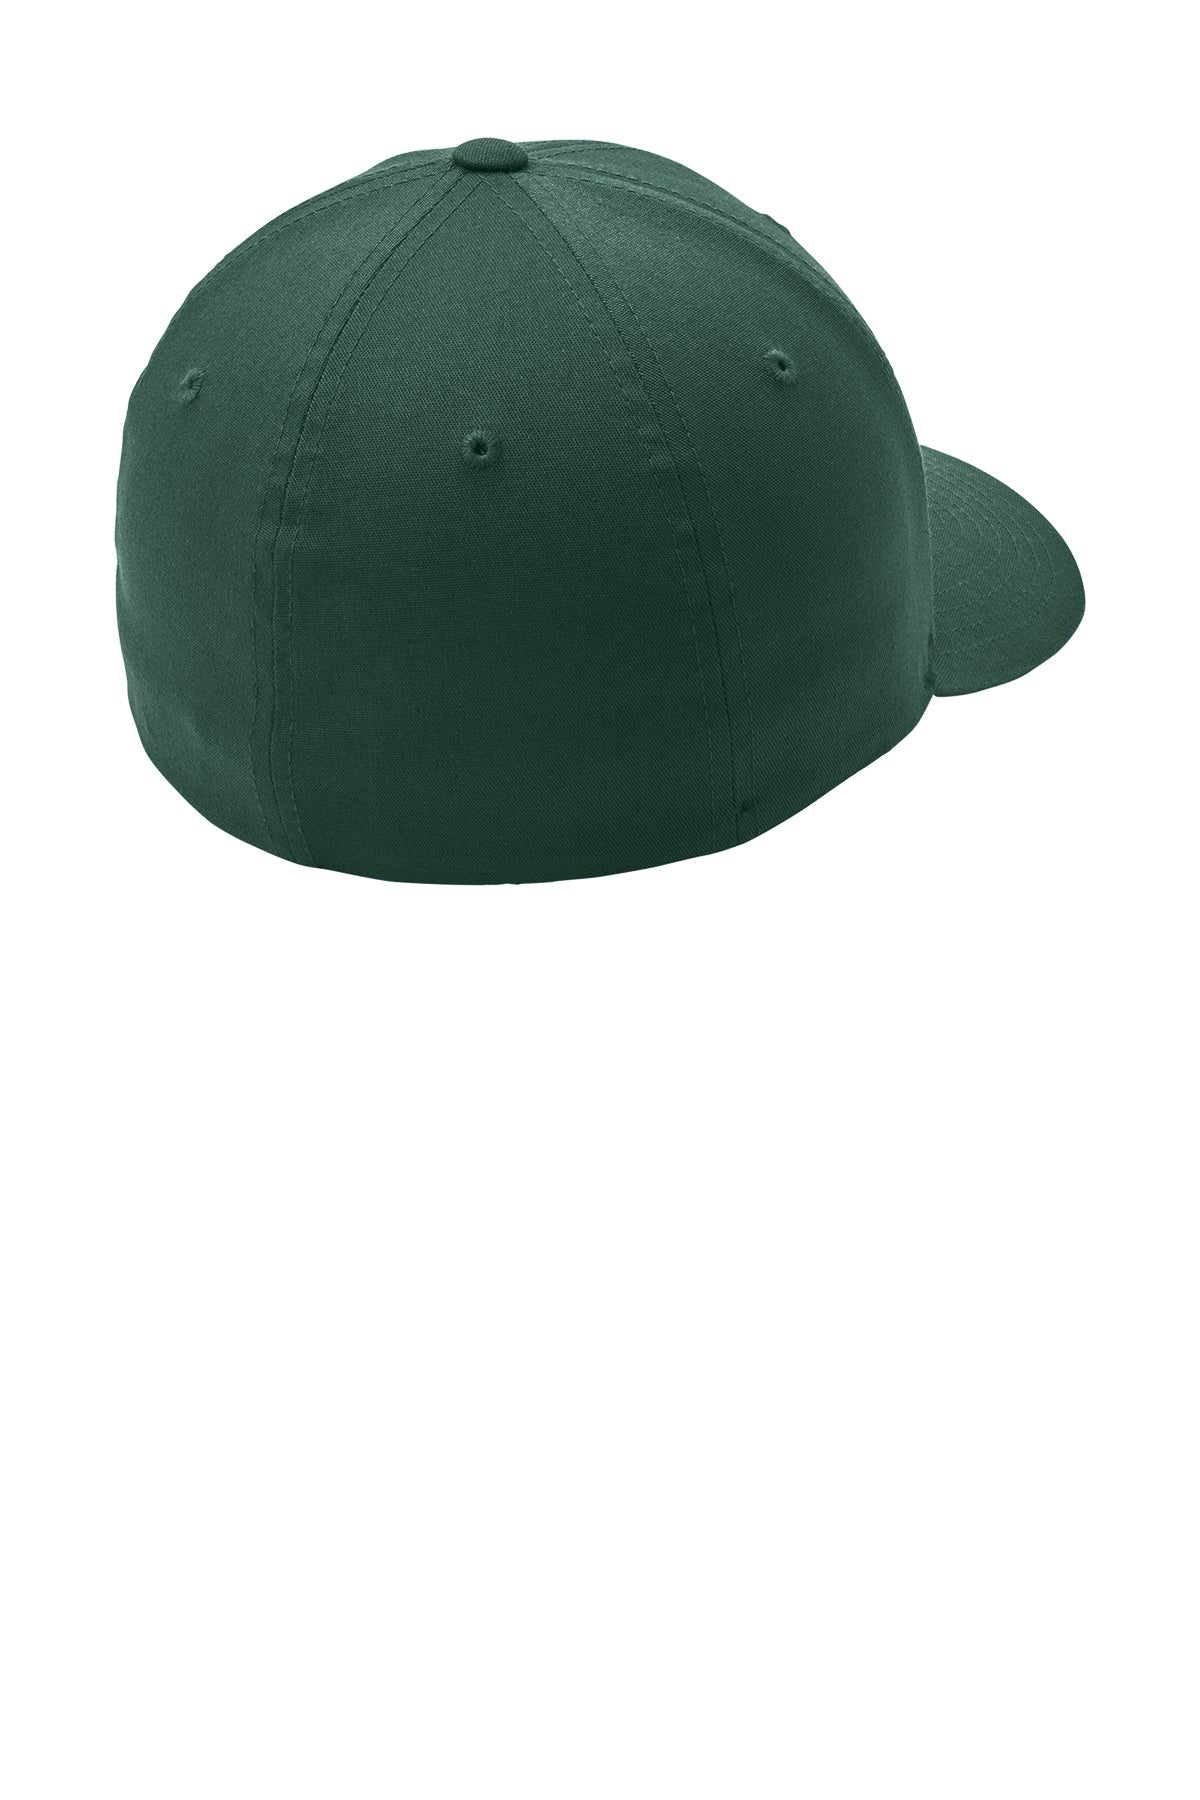 Port Authority Flexfit Cotton Twill Customized Caps, Forest Green